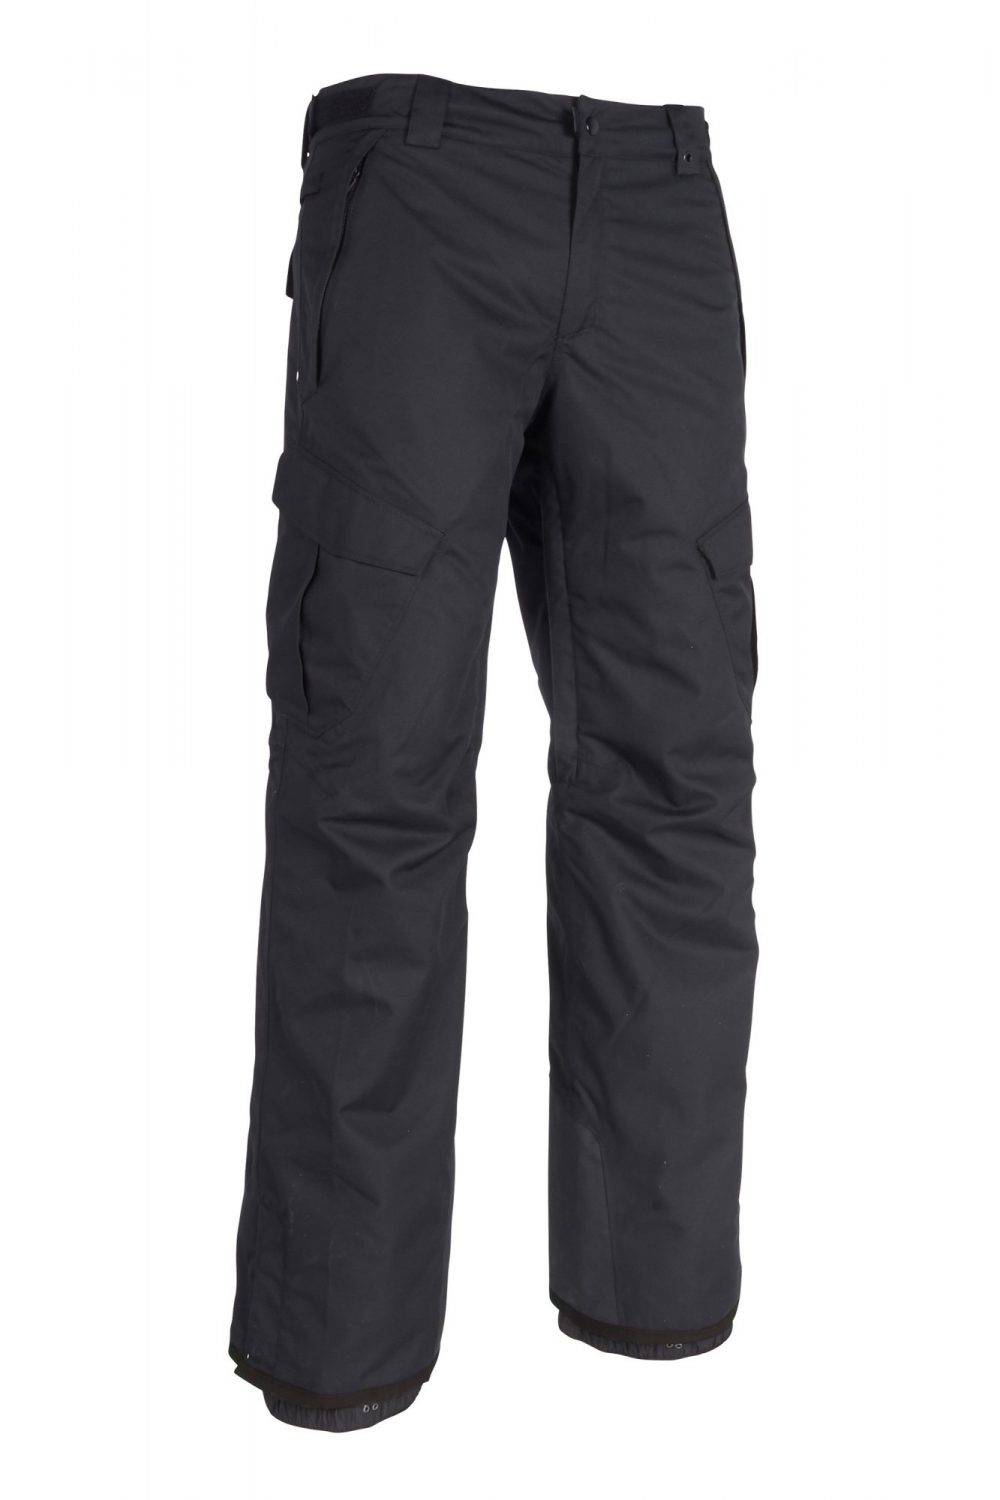 686 Men's Infinity Insulated Cargo Pant | InTheSnow